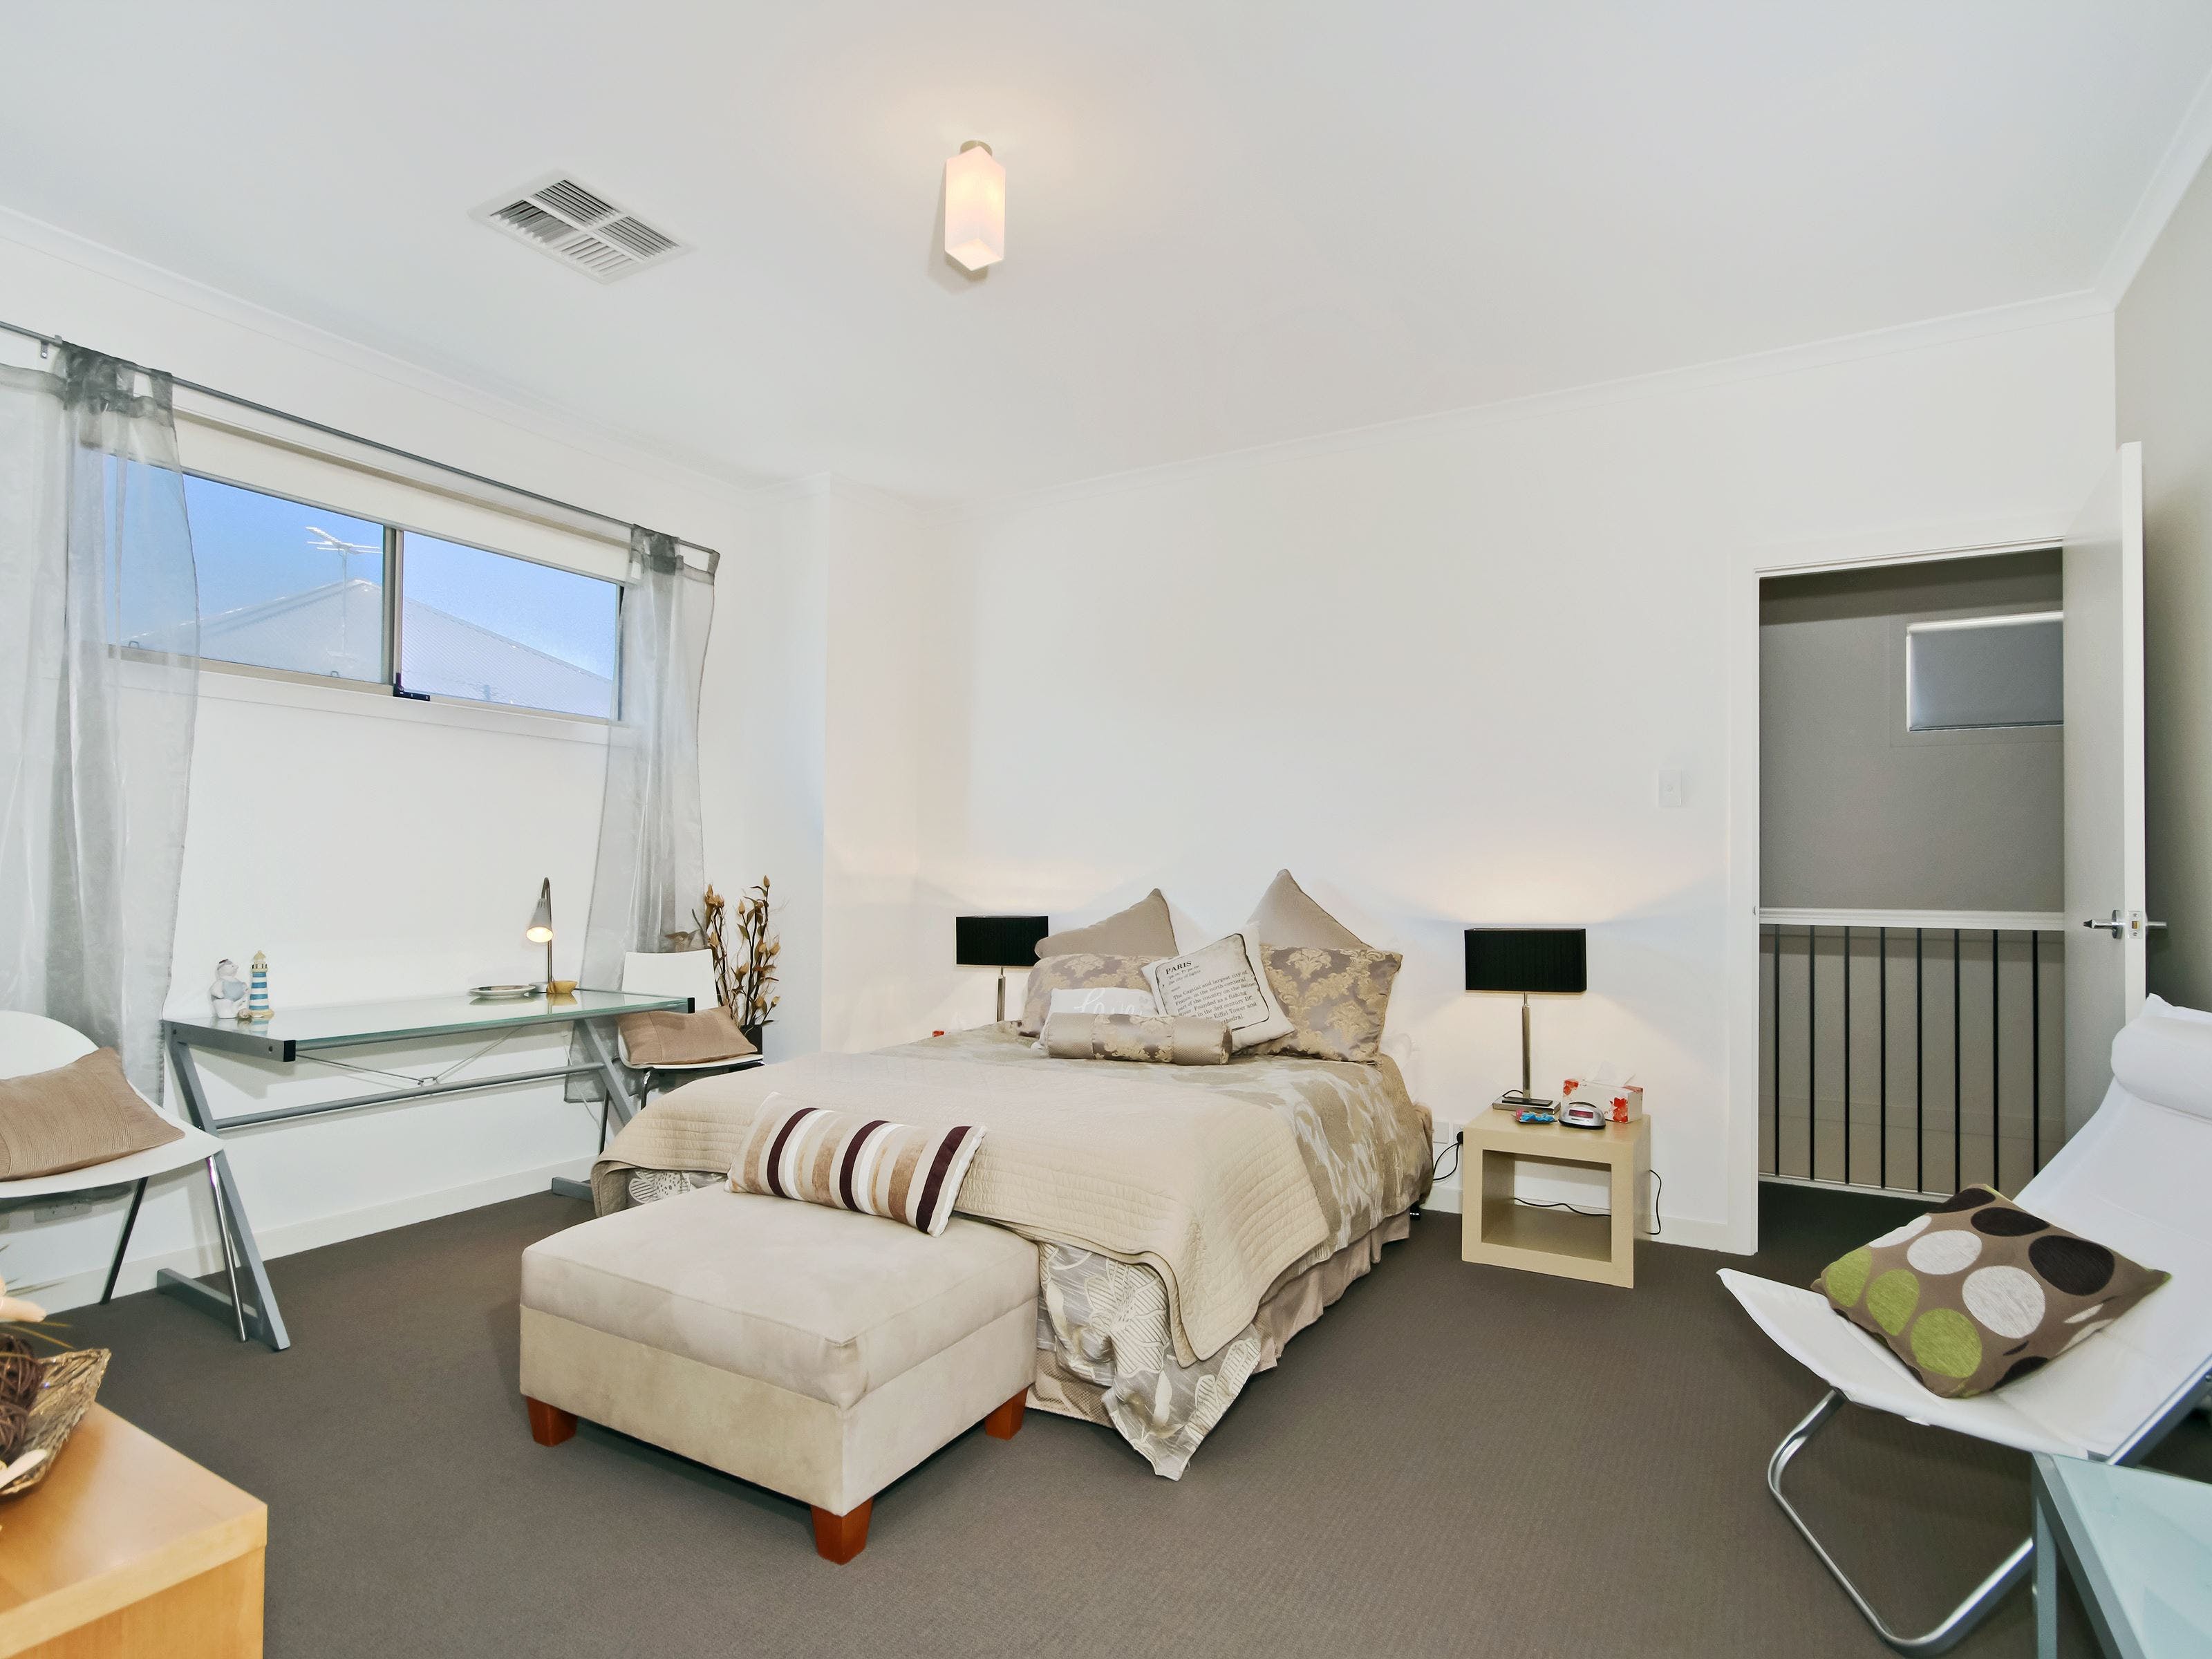 Century 21 SouthCoast The Residence - Coogee Beach Accommodation